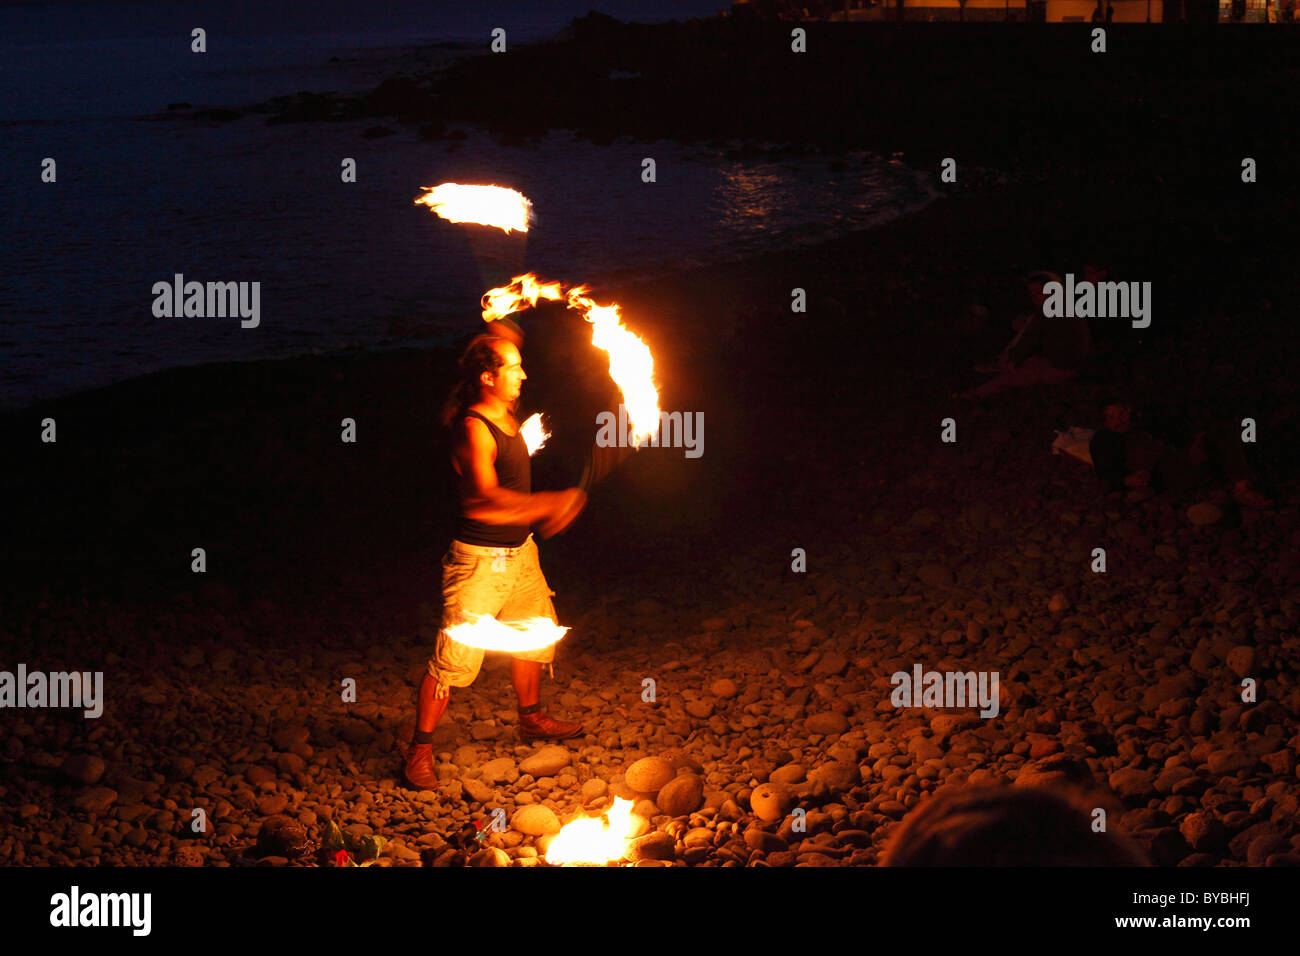 Fire dancer with torches, La Playa, Valle Gran Rey, La Gomera, Canary Islands, Spain, Europe Stock Photo